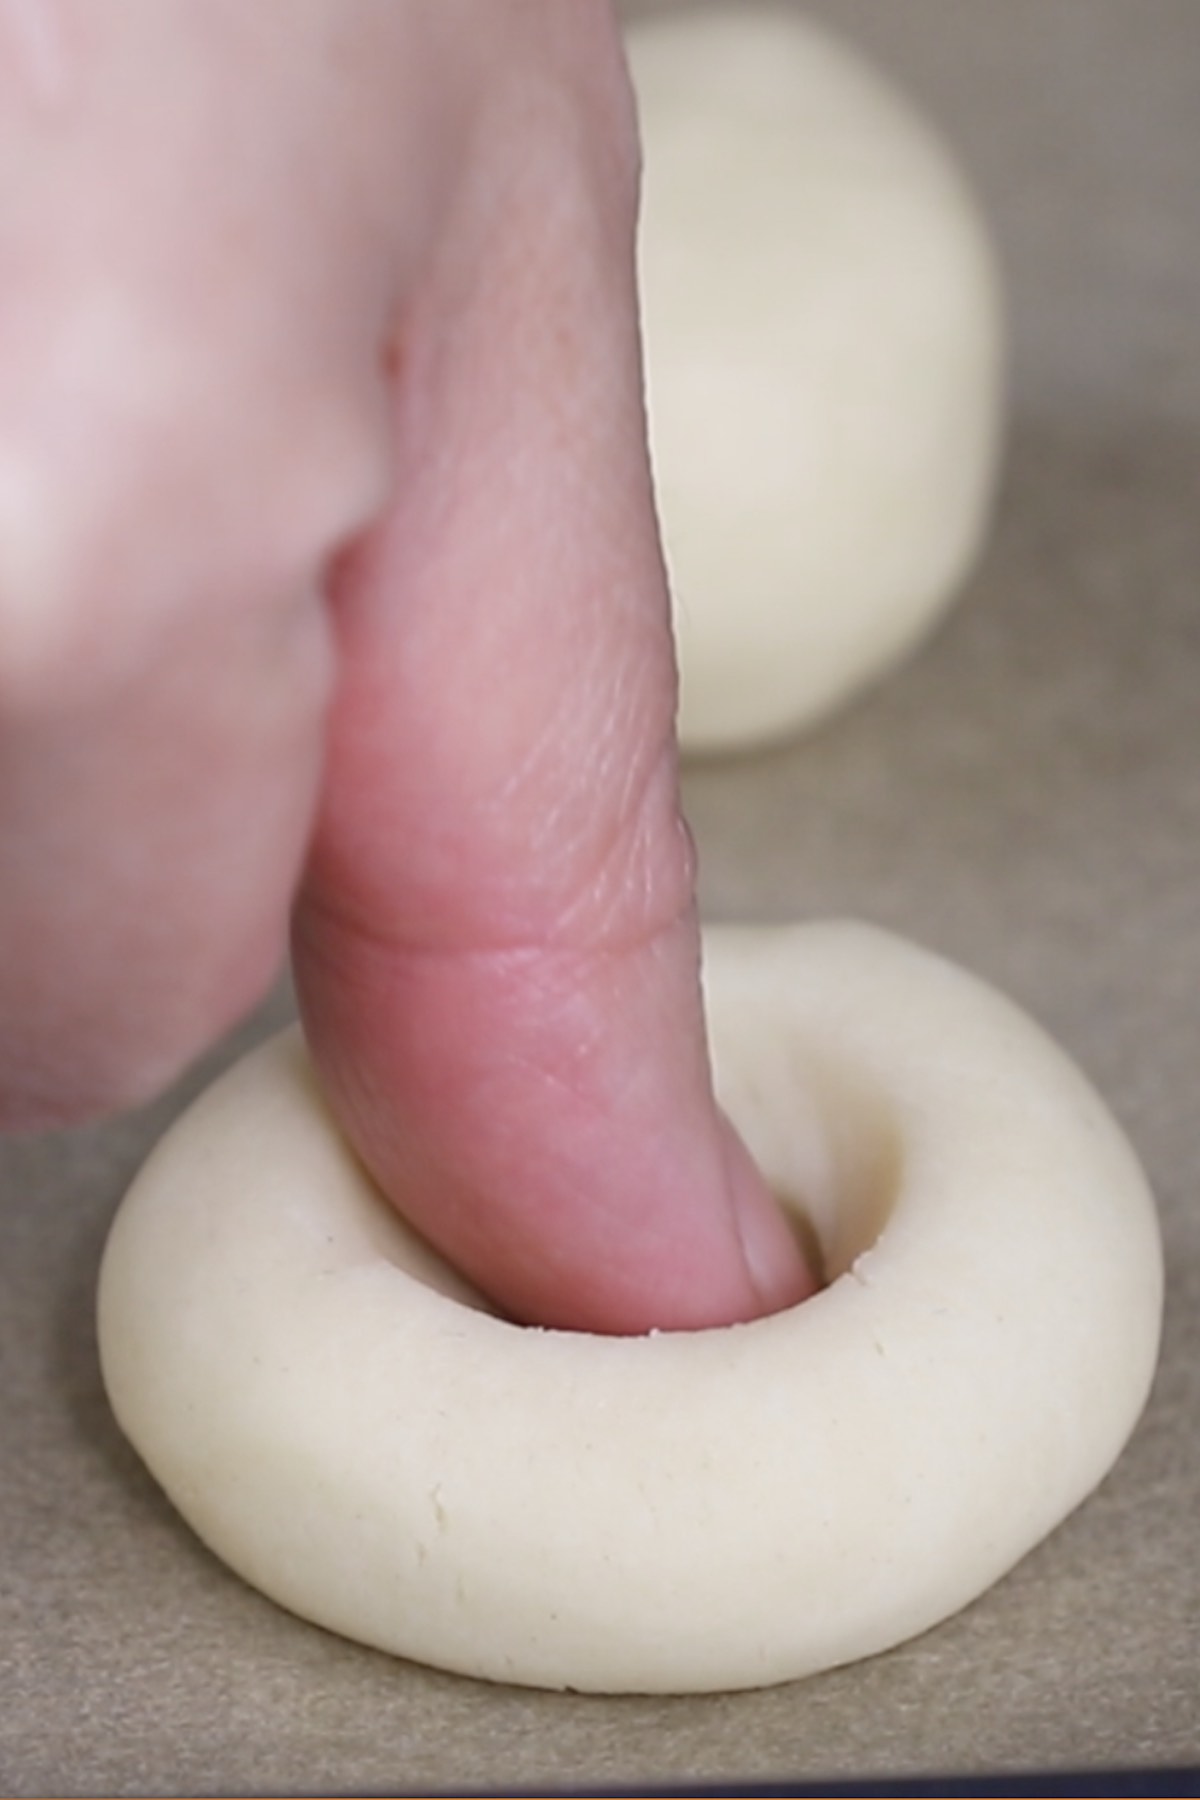 Close-up of pressing the tip of the thumb about a 1/2 inch into the middle of a cookie dough ball to make an imprint.